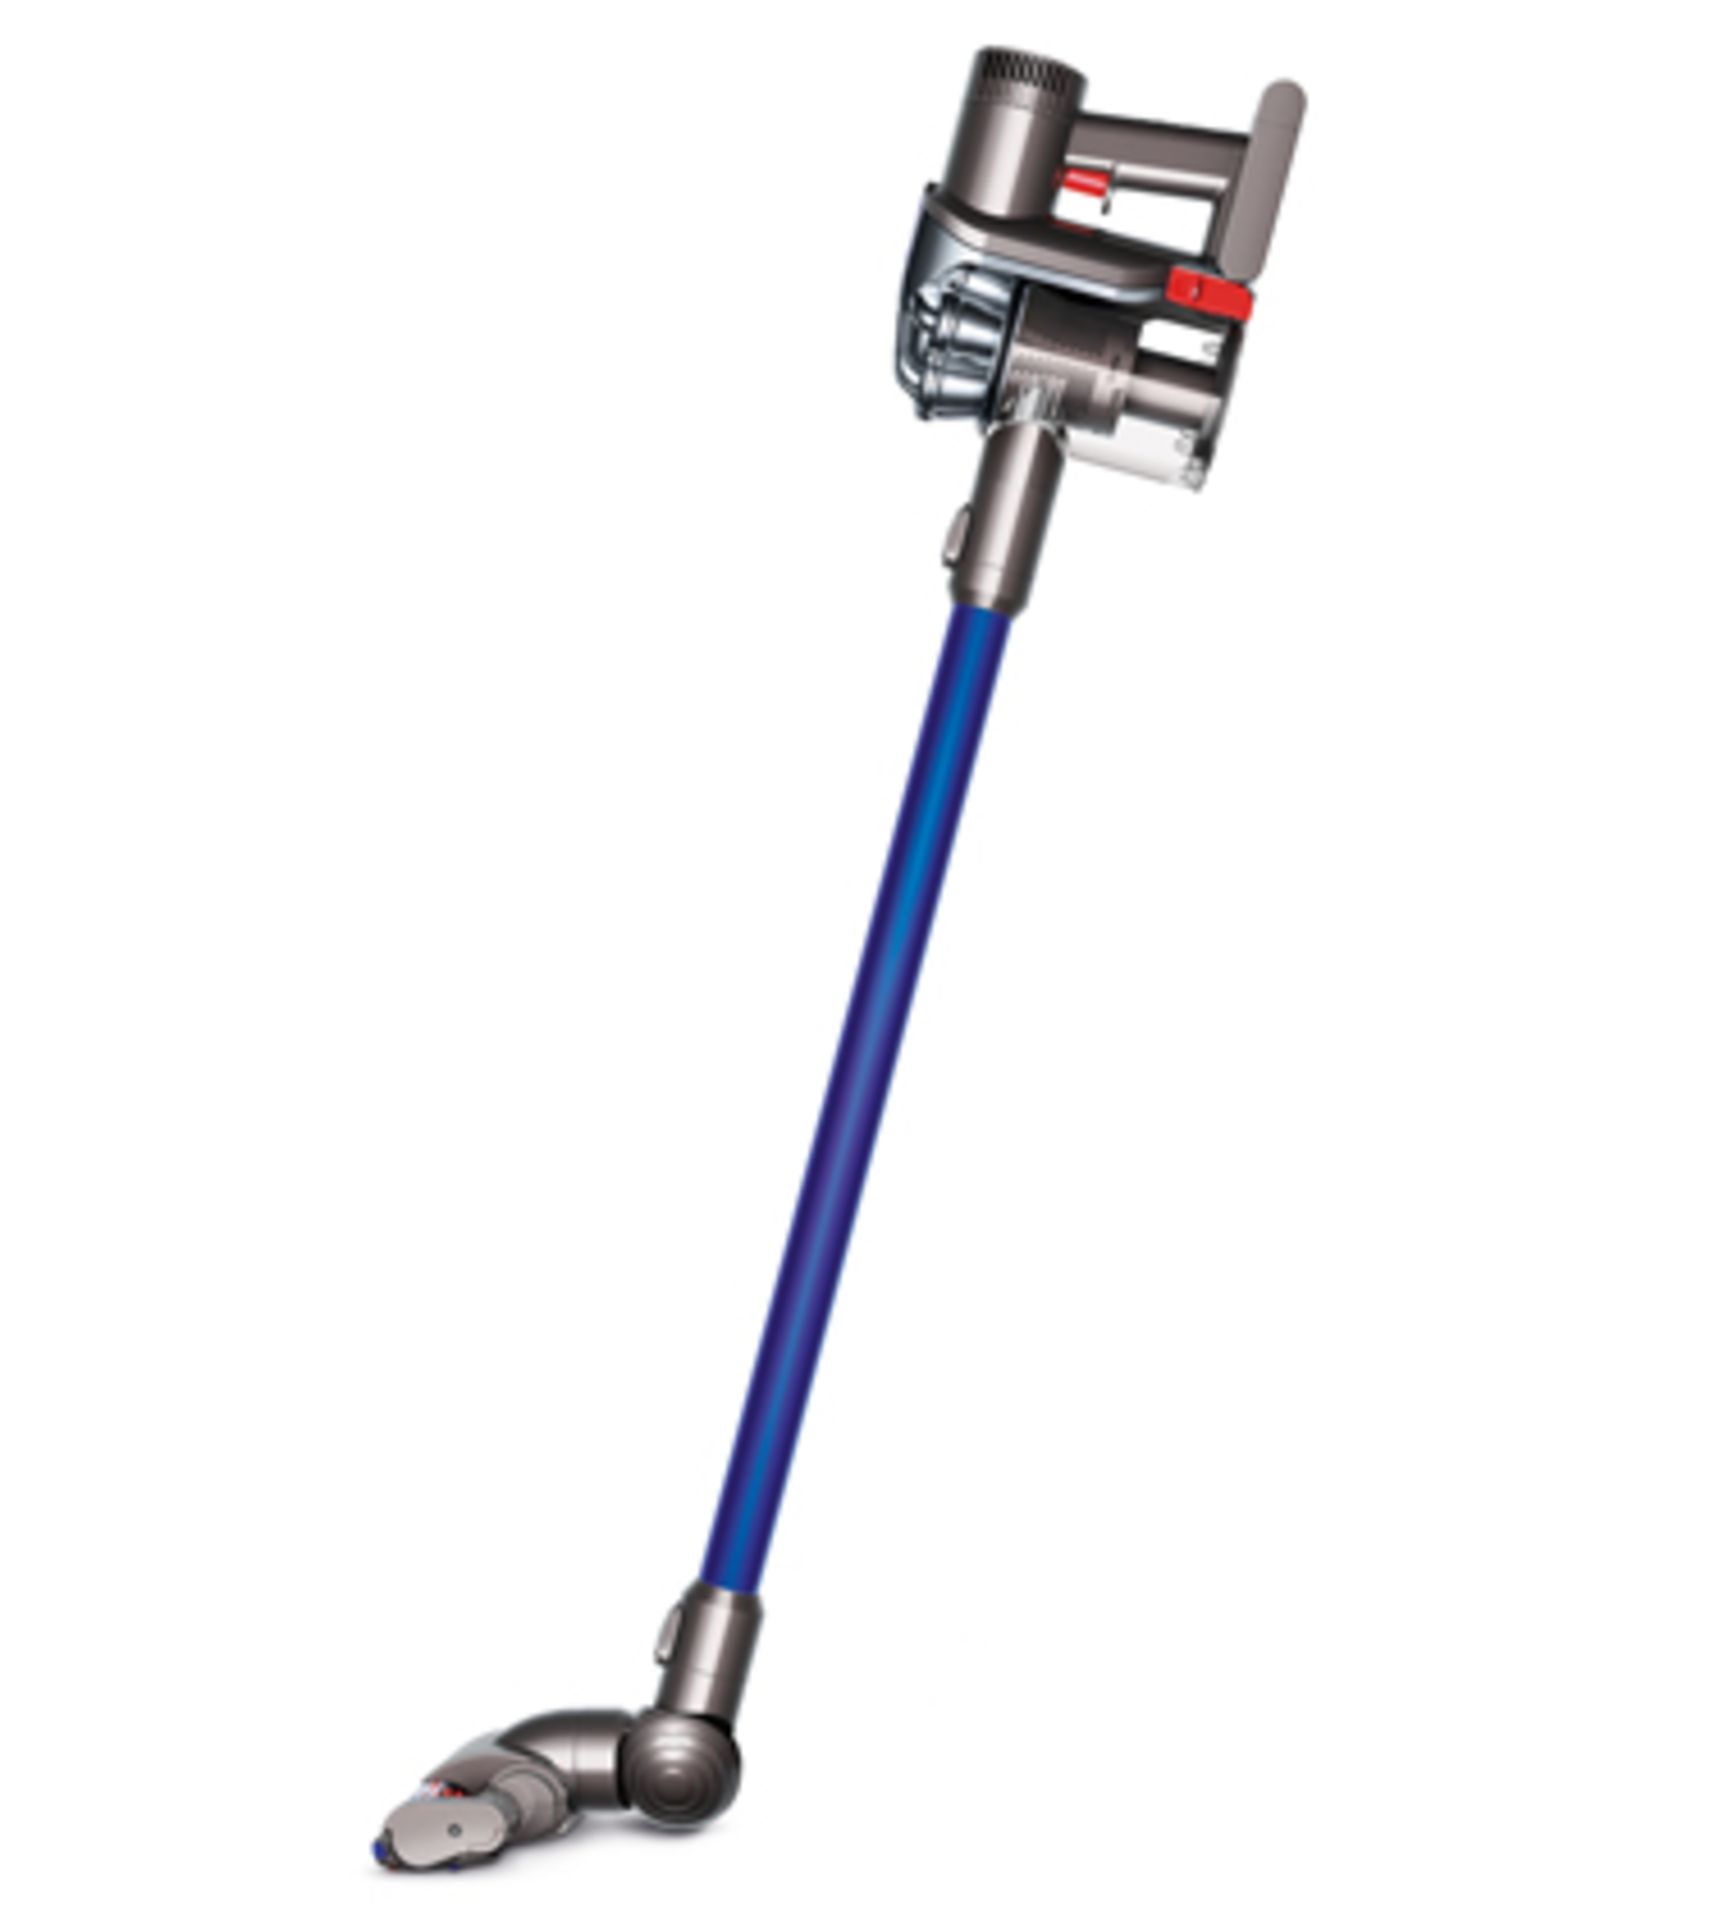 BOXED DYSON DC44 HANDHELD CORDLESS VAC CLEANER RRP £220.00 15/10/15